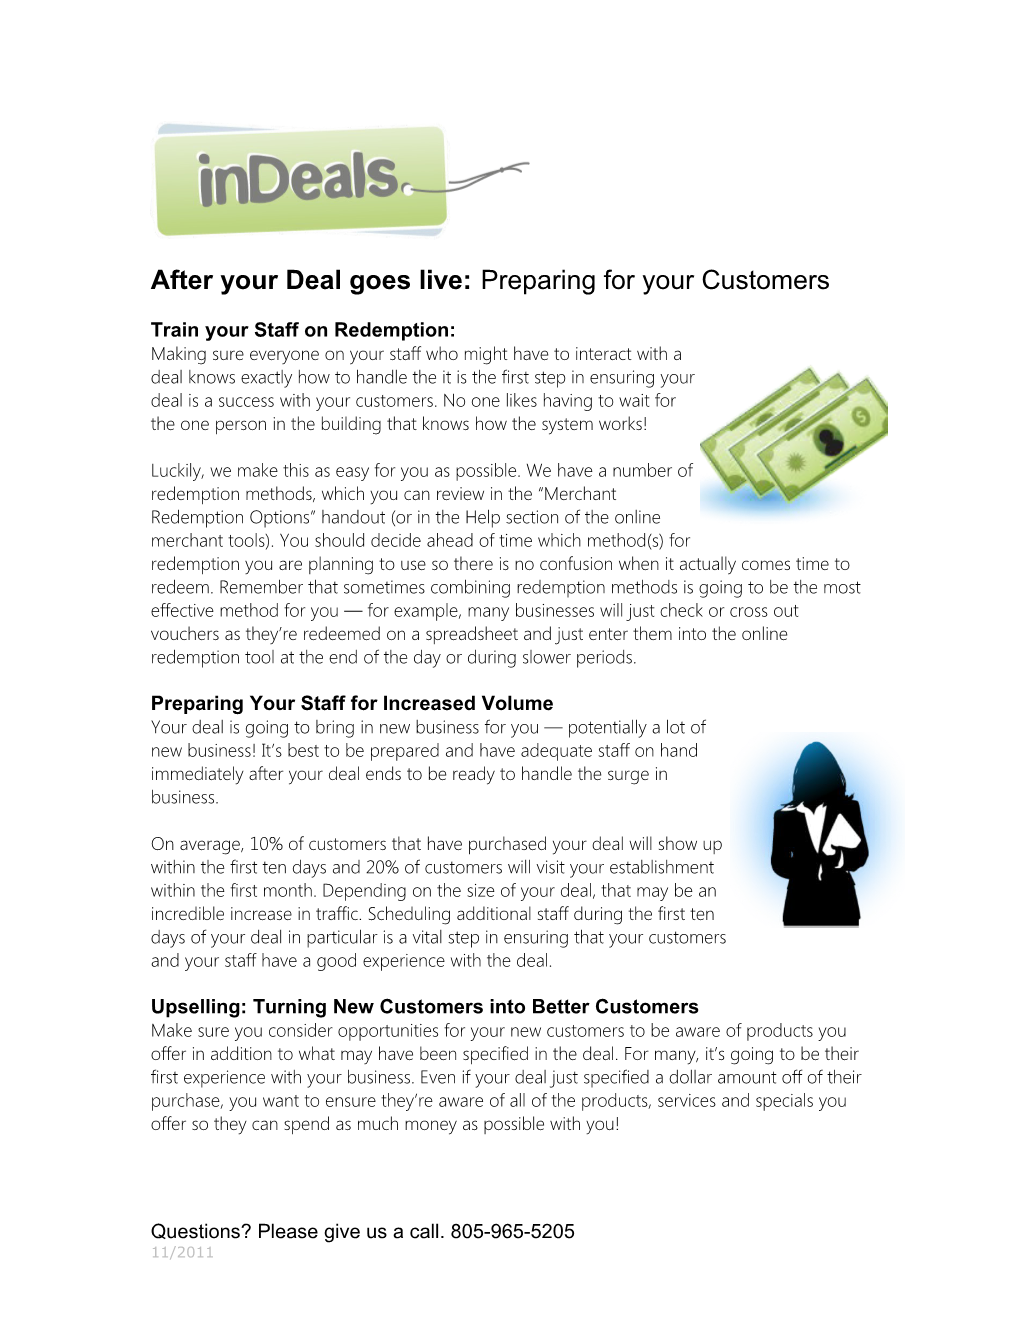 After Your Deal Goes Live: Preparing for Your Customers